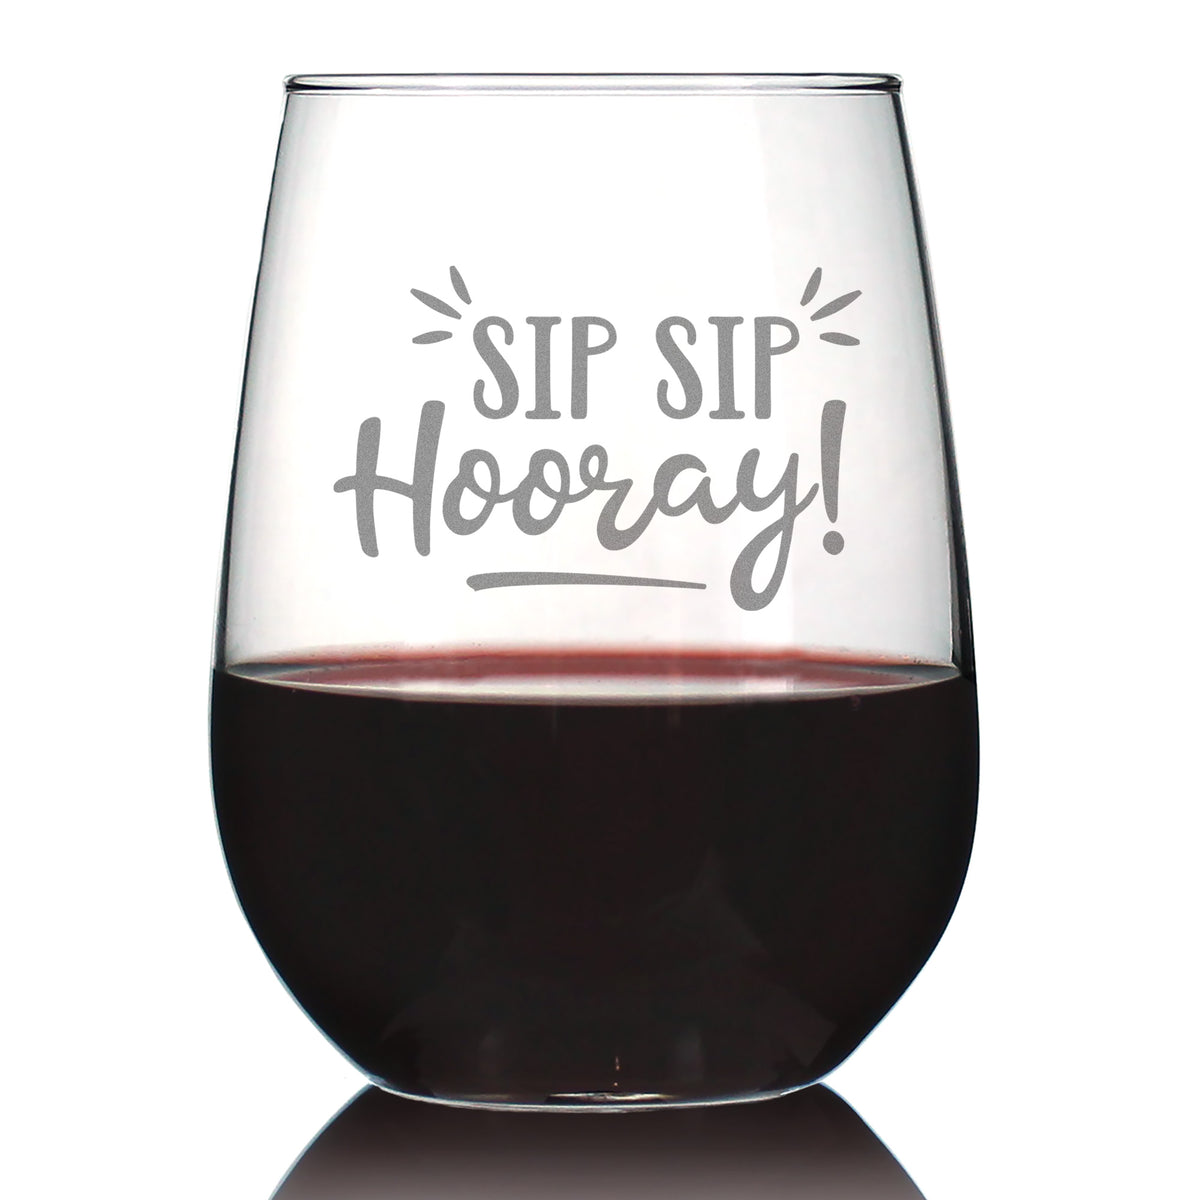 Sip Sip Hooray – Cute Funny Wine Stemless Glass, Large 17 Ounces, Etched Sayings, Gift Box